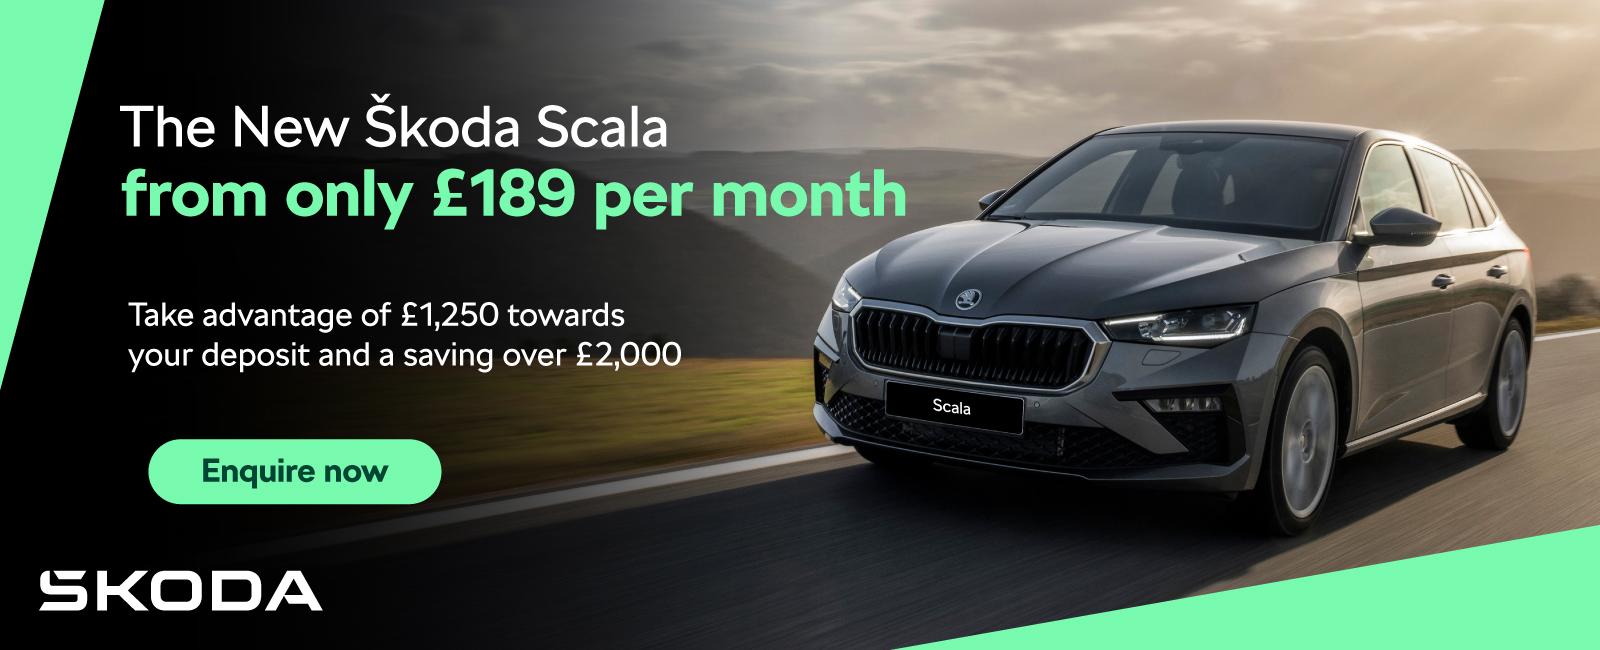 The Skoda Scala from only £189 per month